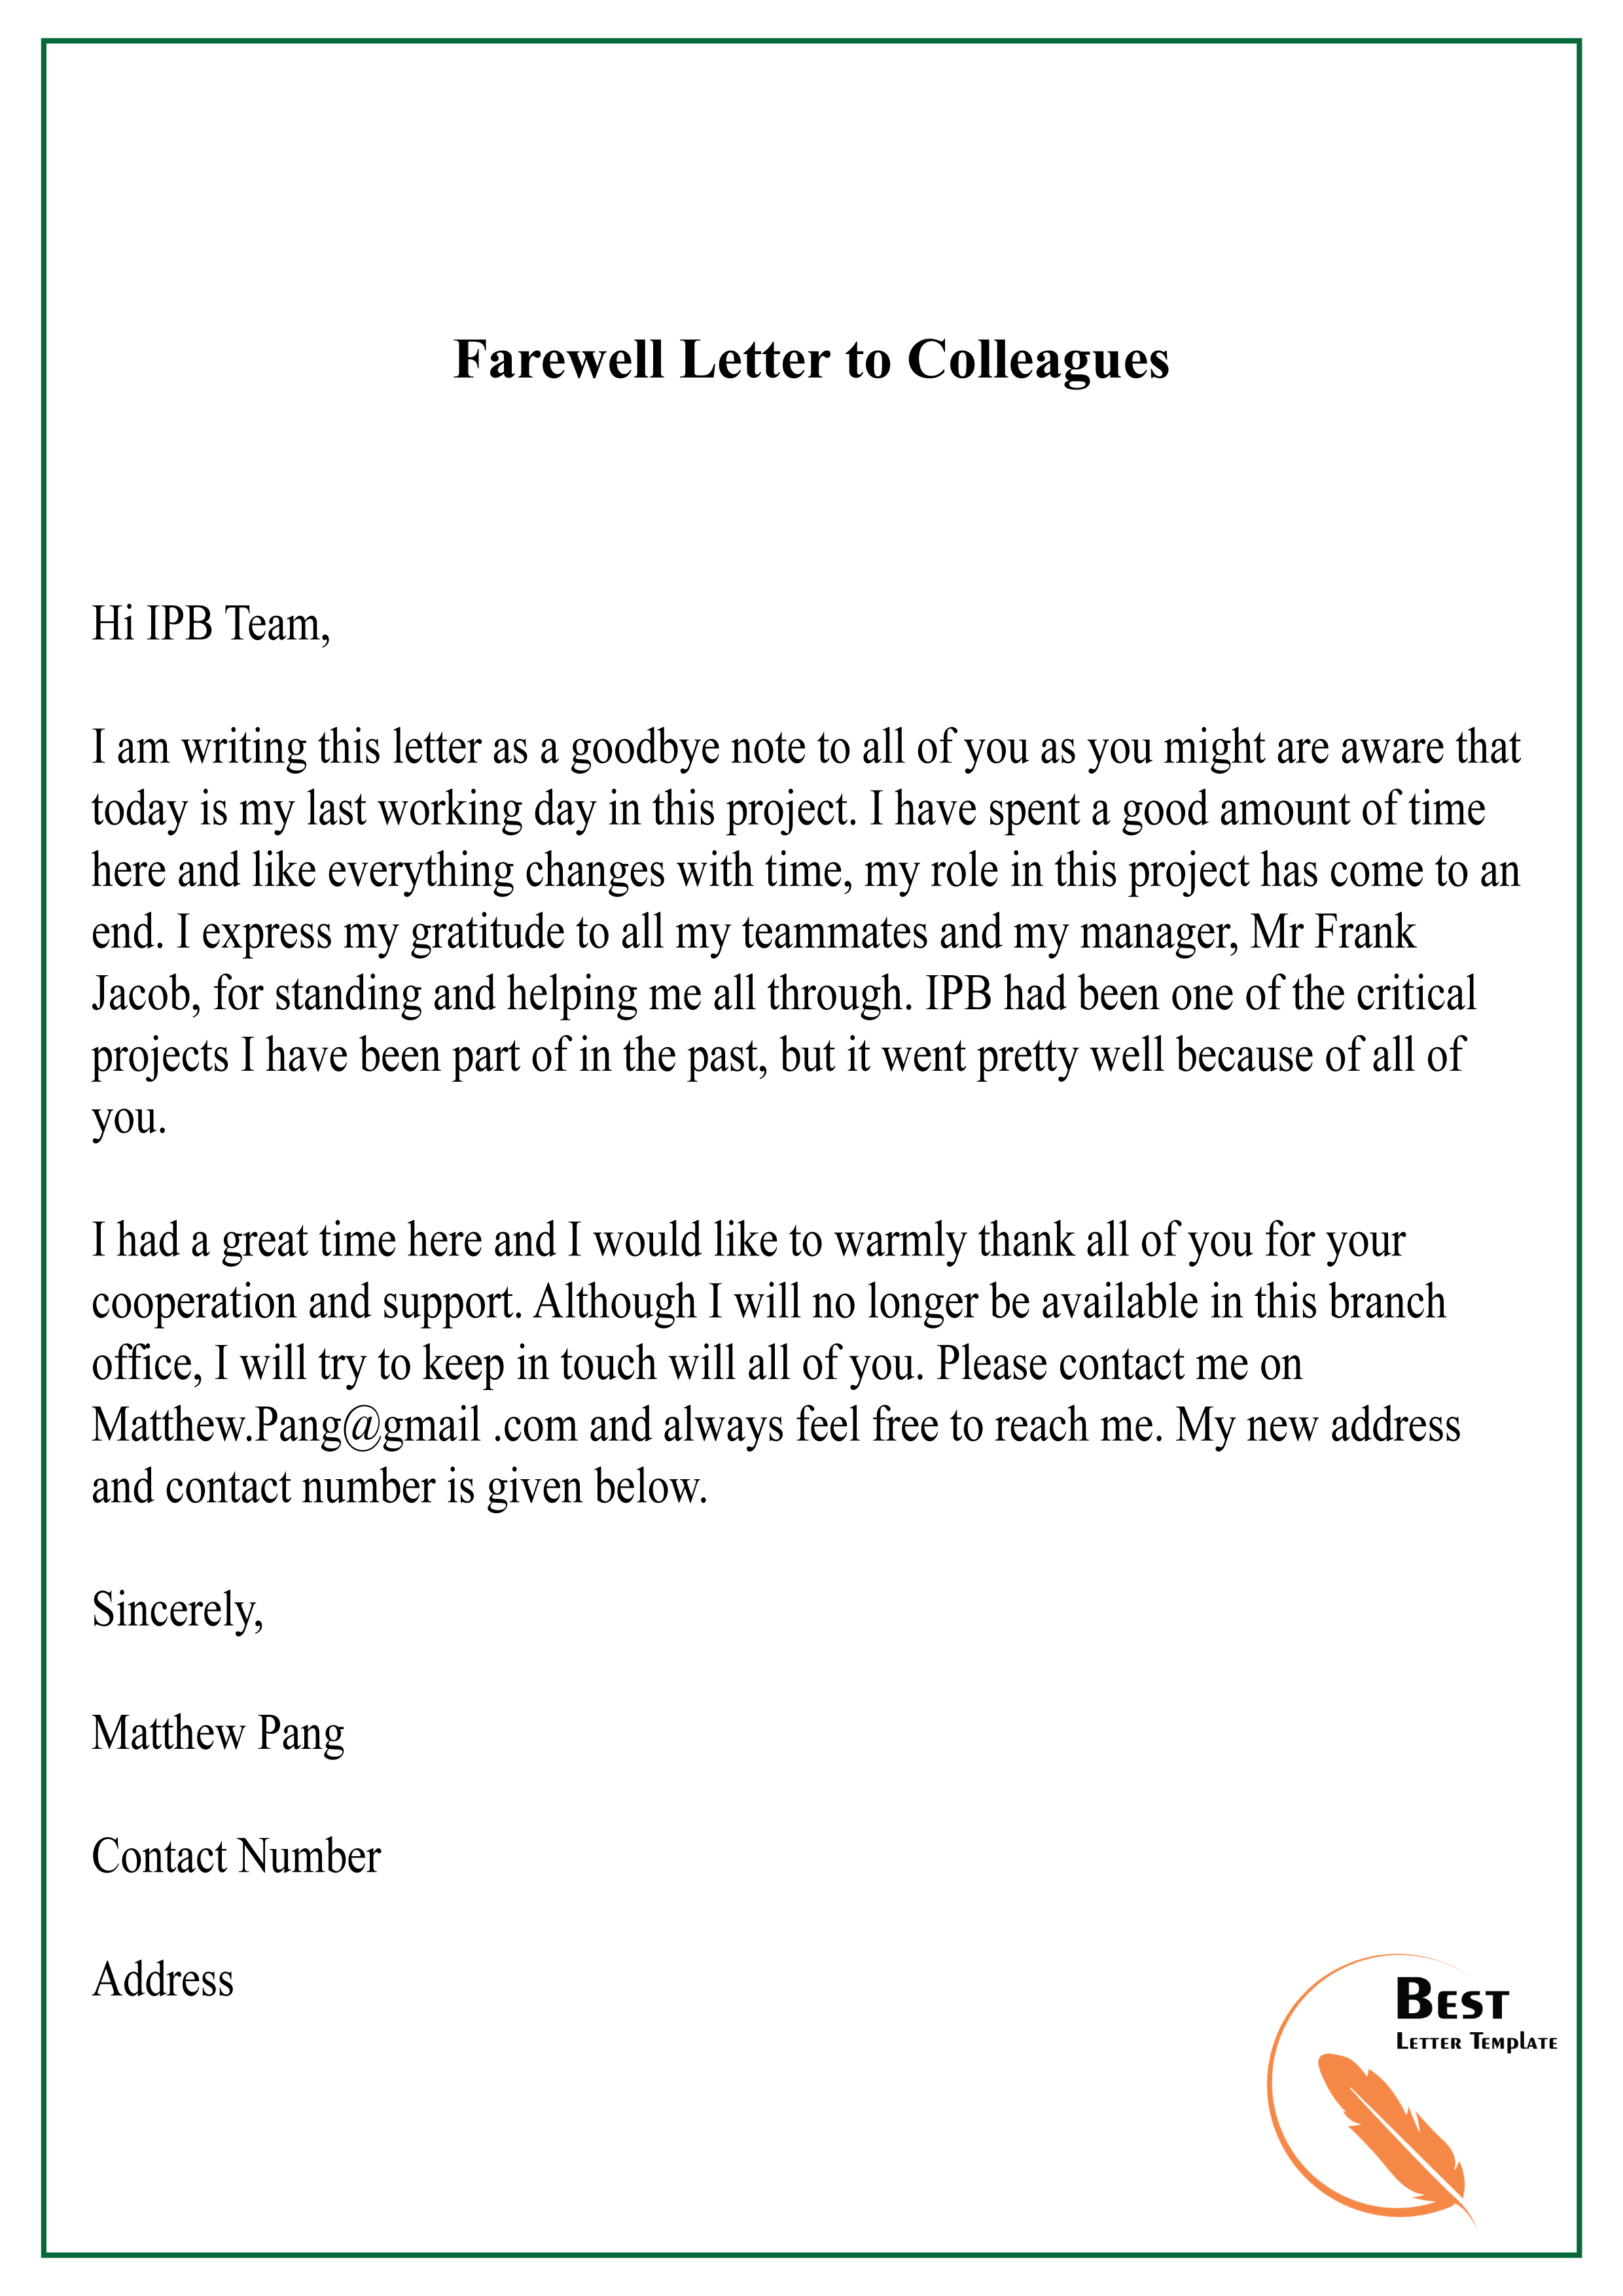 Farewell Letter To Colleagues 01 Best Letter Template